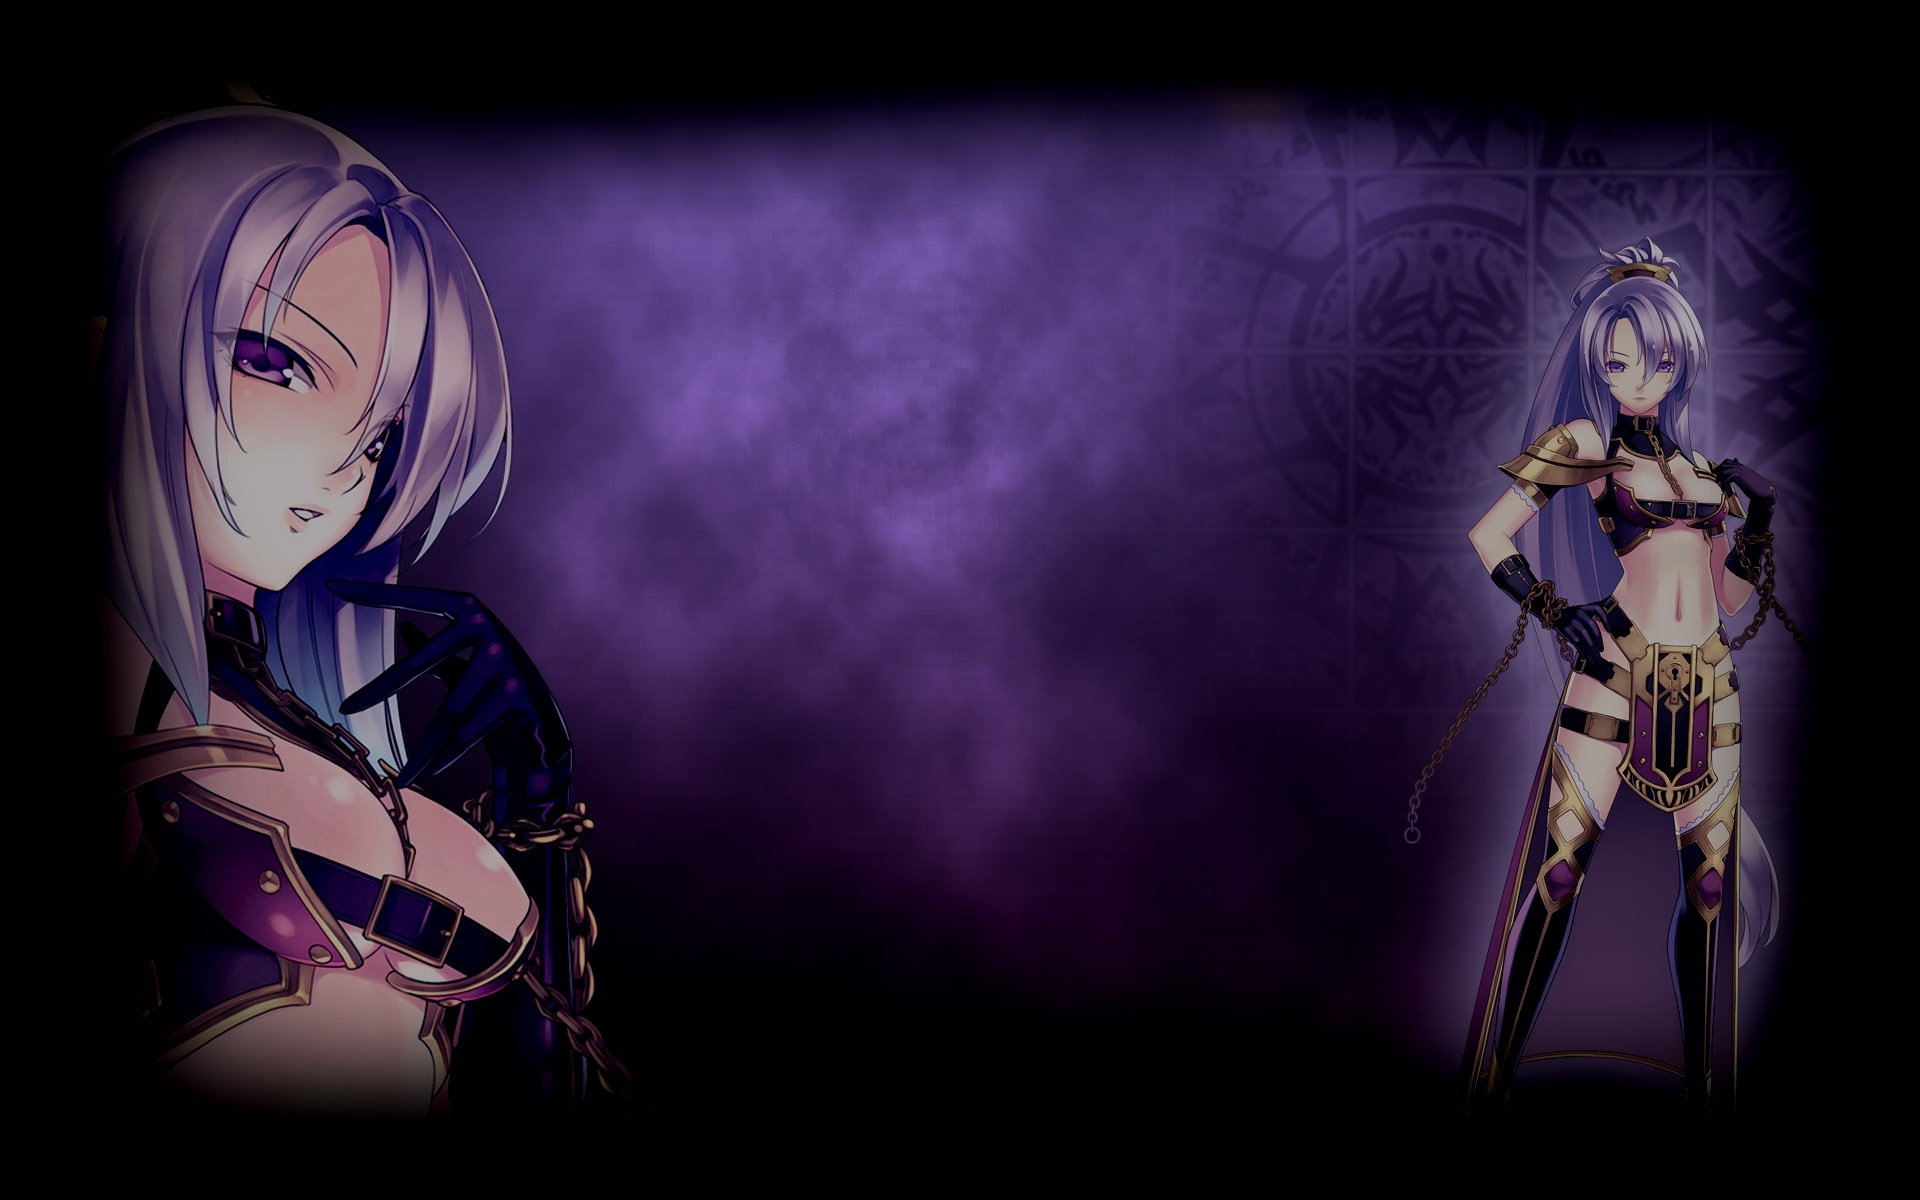 Video Game Agarest: Generations of War 2 HD Wallpaper | Background Image